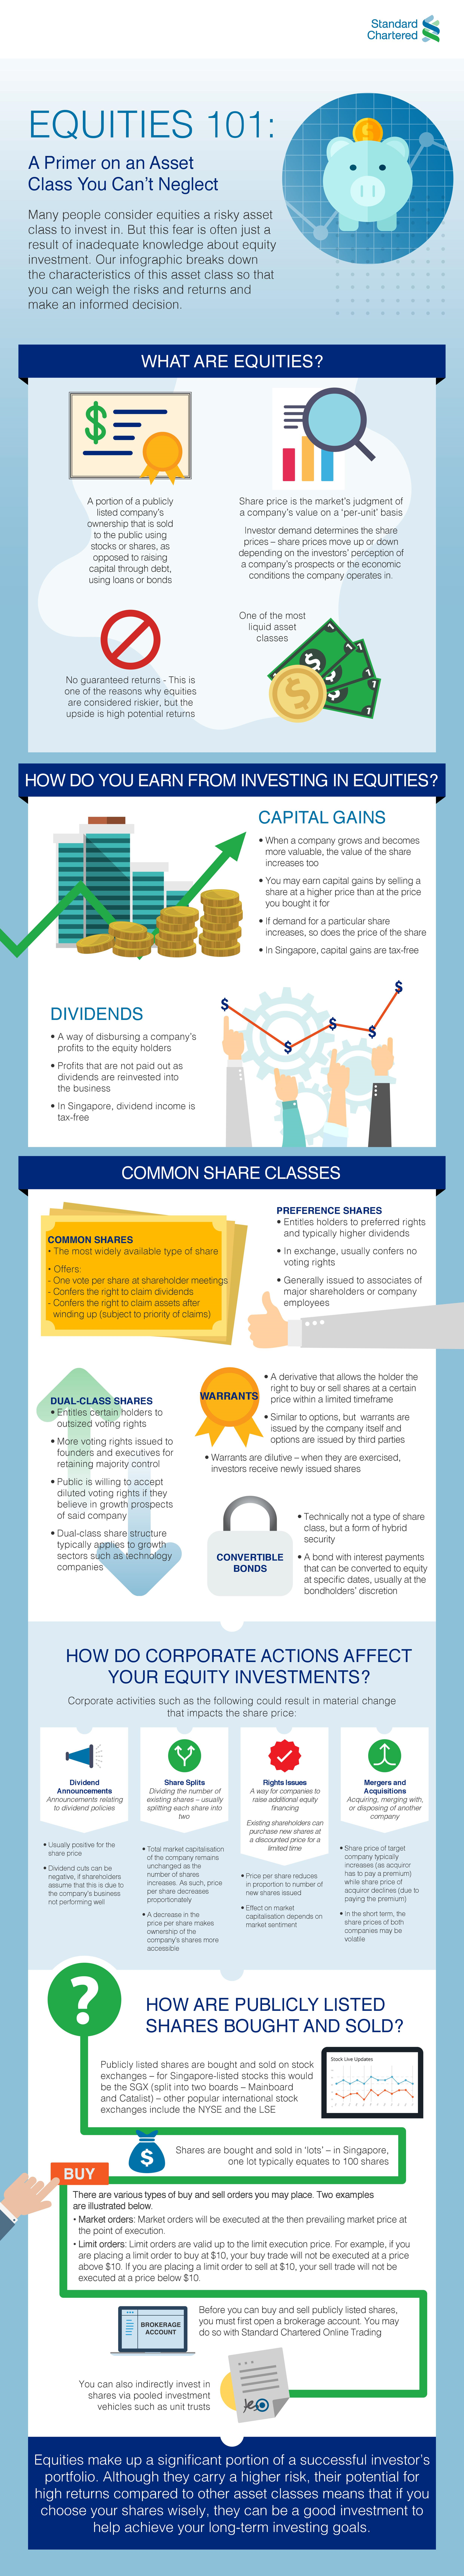 Sg equities infographic